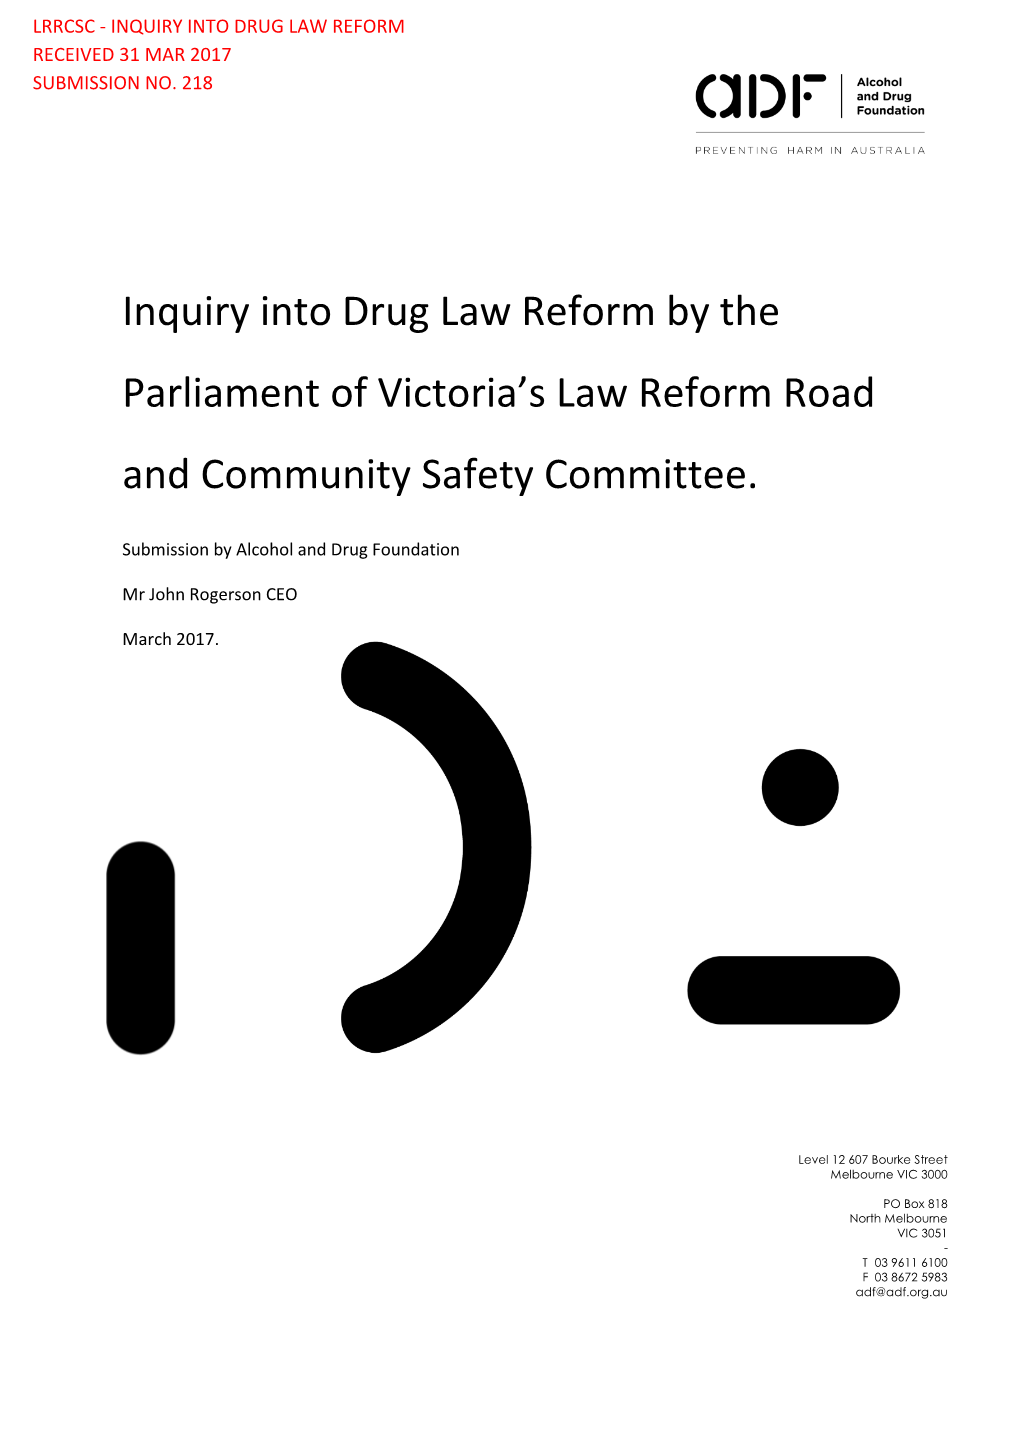 Inquiry Into Drug Law Reform by the Parliament of Victoria's Law Reform